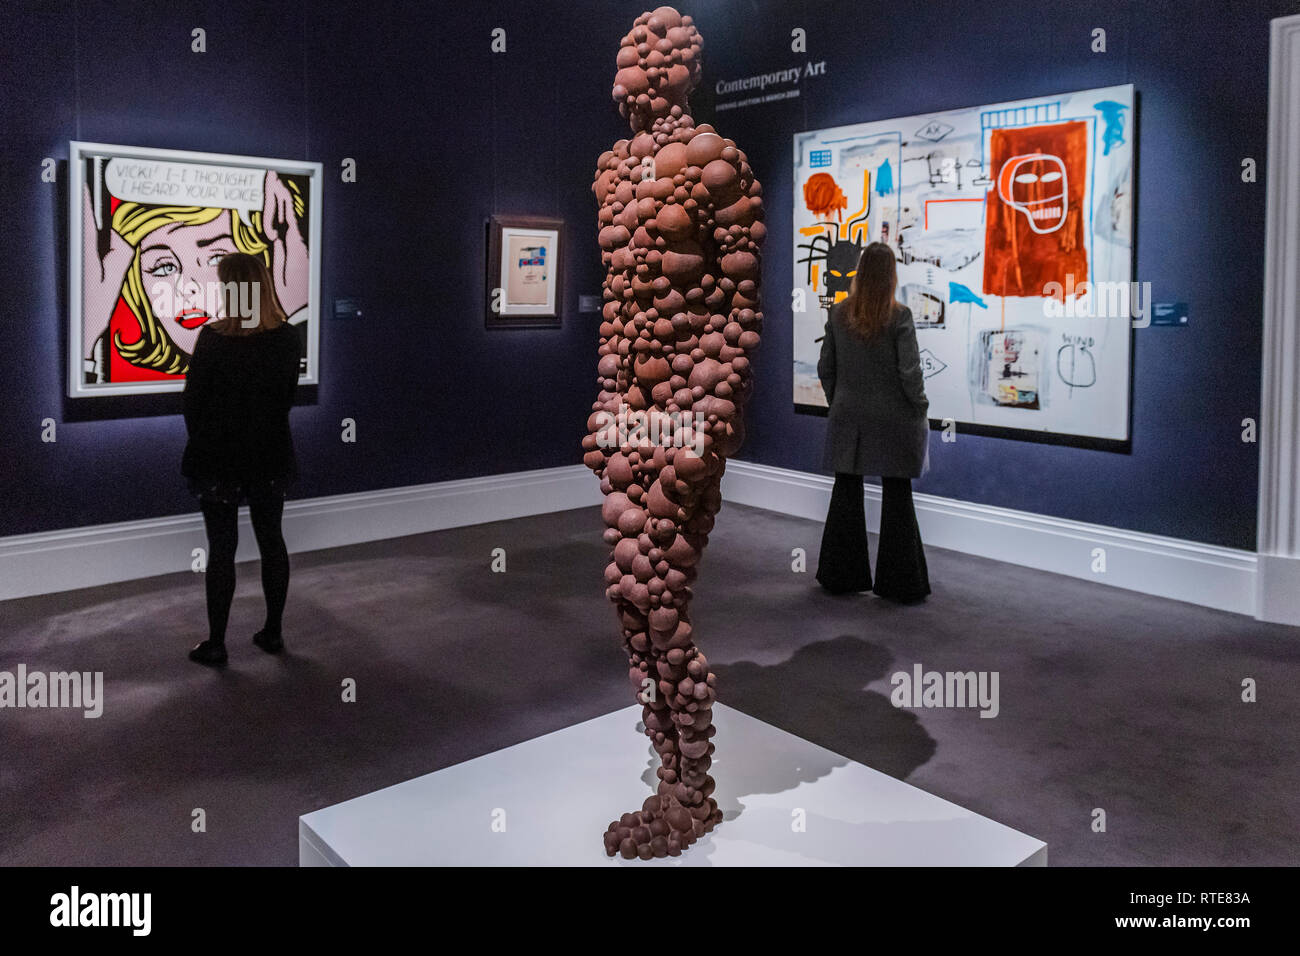 London, UK. 1st Mar 2019. Standing Matter XII by Antony Gormley, est £250-350,000 with, in the background, Roy Lichtenstein, Vicki! I--I Thought I Heard Your Voice, 1964, Est. £5,000,000-7,000,000 and Jean-Michel Basquiat, Apex, 1986, Estimate £5-7m  - A preview ahead of the Sotheby’s Contemporary Art Evening Auction at Sotheby's New Bond Street, London. The auction will take place on 5 March. Credit: Guy Bell/Alamy Live News Stock Photo